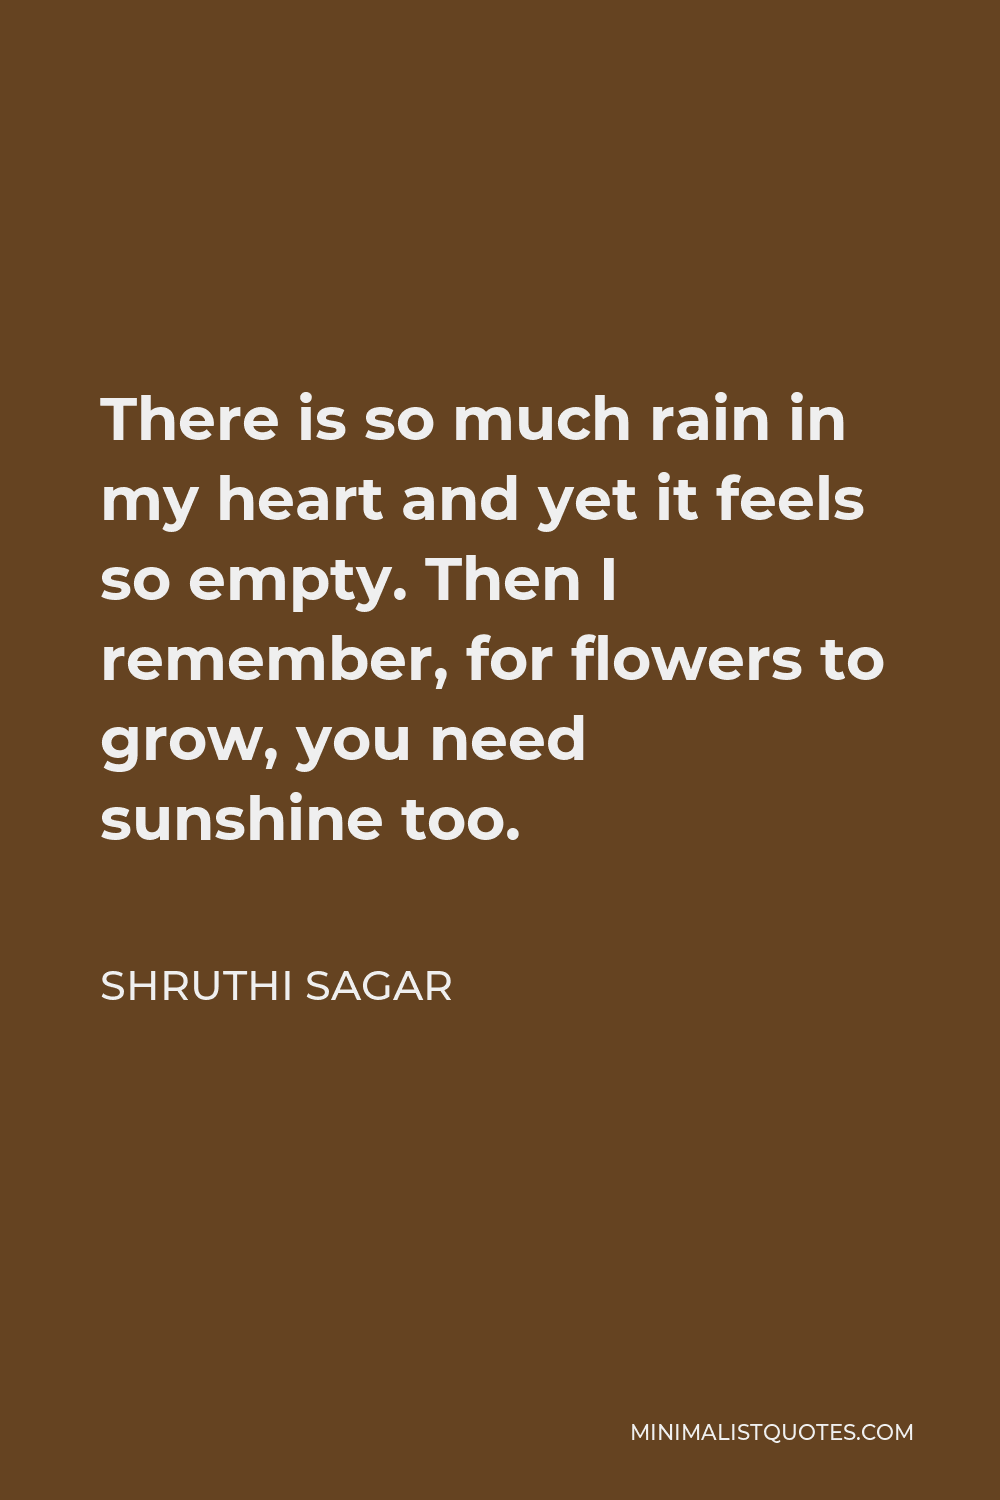 Shruthi Sagar Quote - There is so much rain in my heart and yet it feels so empty. Then I remember, for flowers to grow, you need sunshine too.